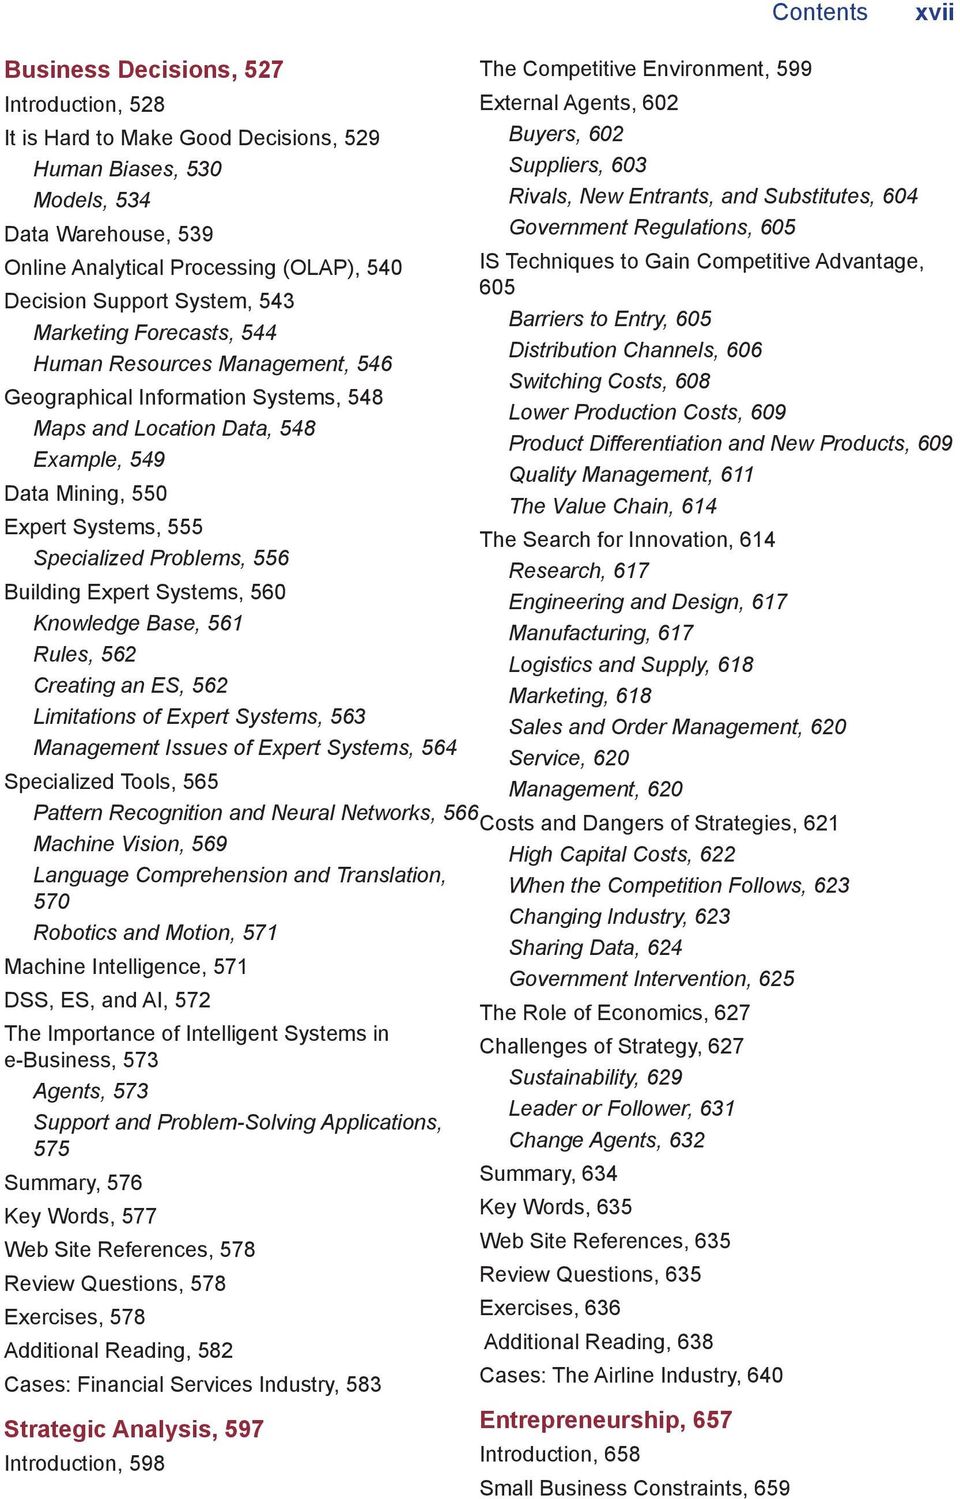 Problems, 556 Building Expert Systems, 560 Knowledge Base, 561 Rules, 562 Creating an ES, 562 Limitations of Expert Systems, 563 Management Issues of Expert Systems, 564 Specialized Tools, 565